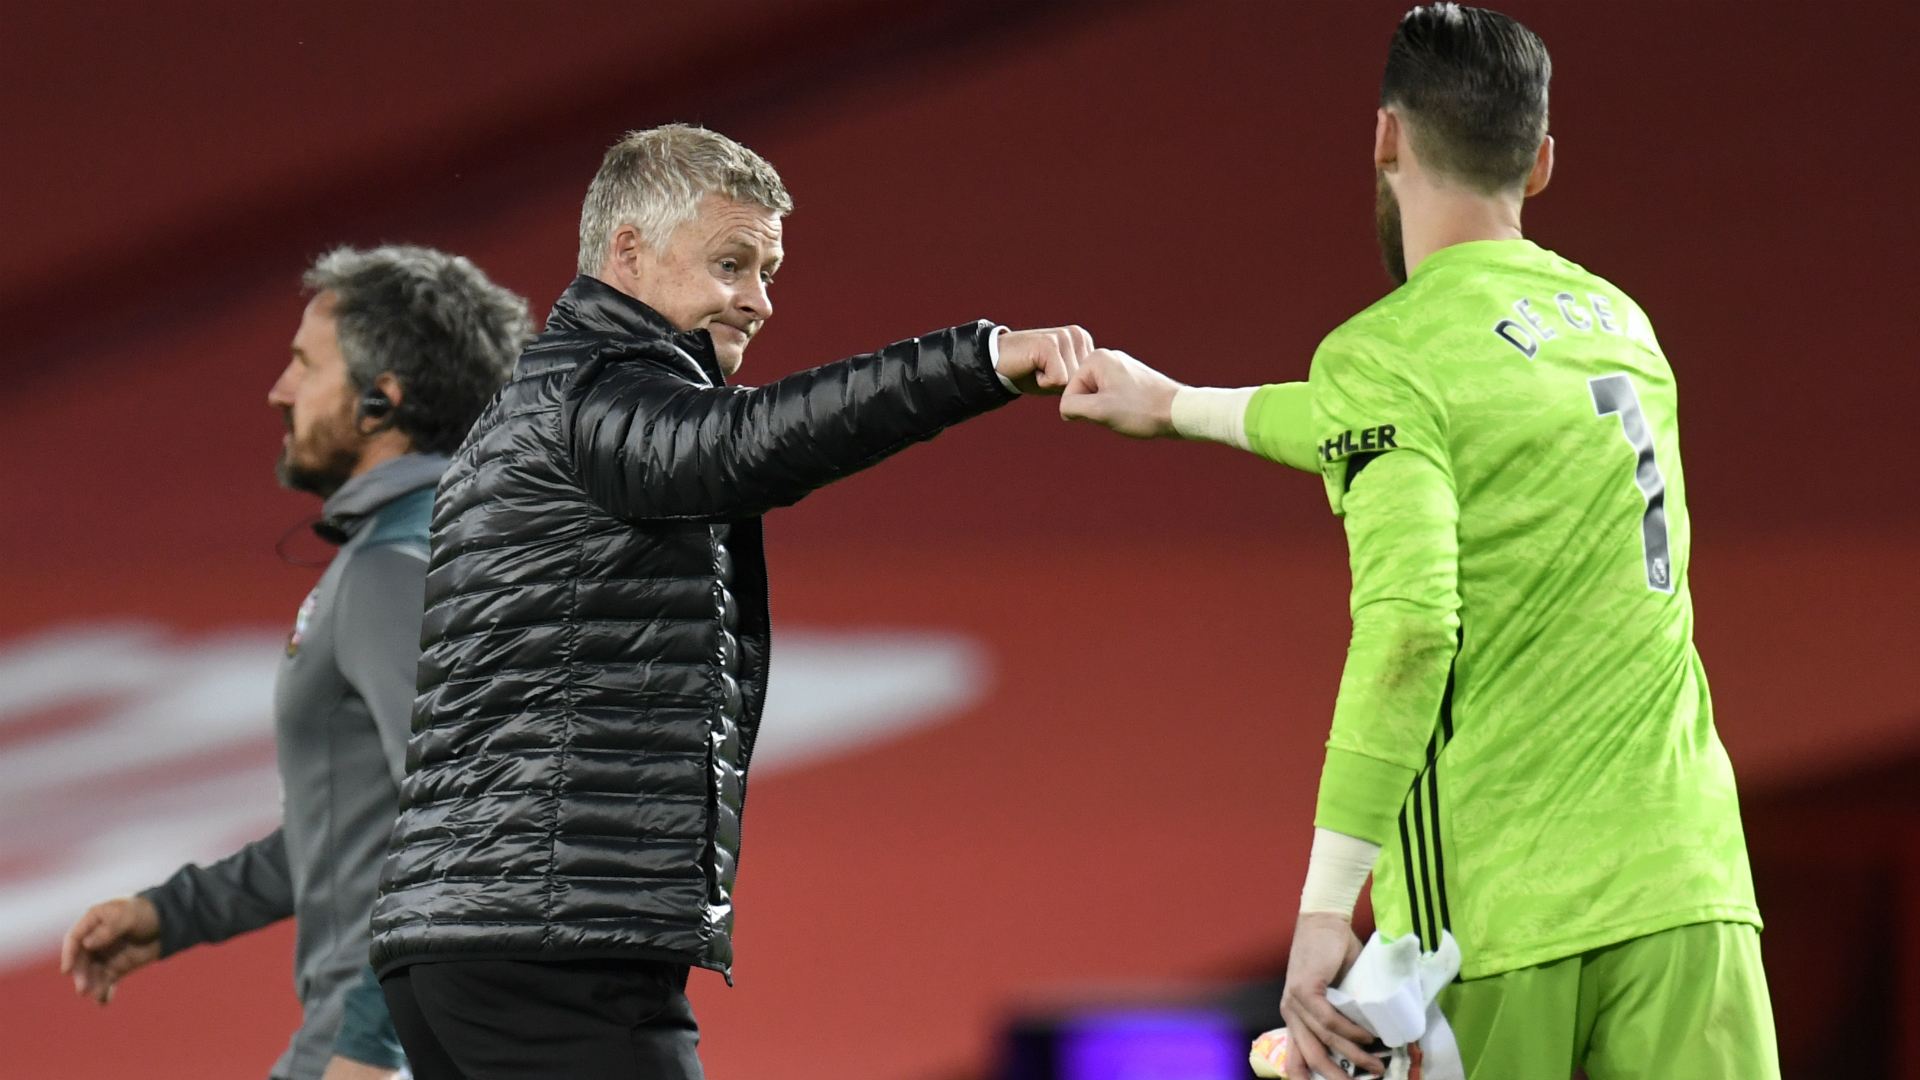 Ole Gunnar Solskjaer discussed Manchester United's draw at home to Southampton in the Premier League.